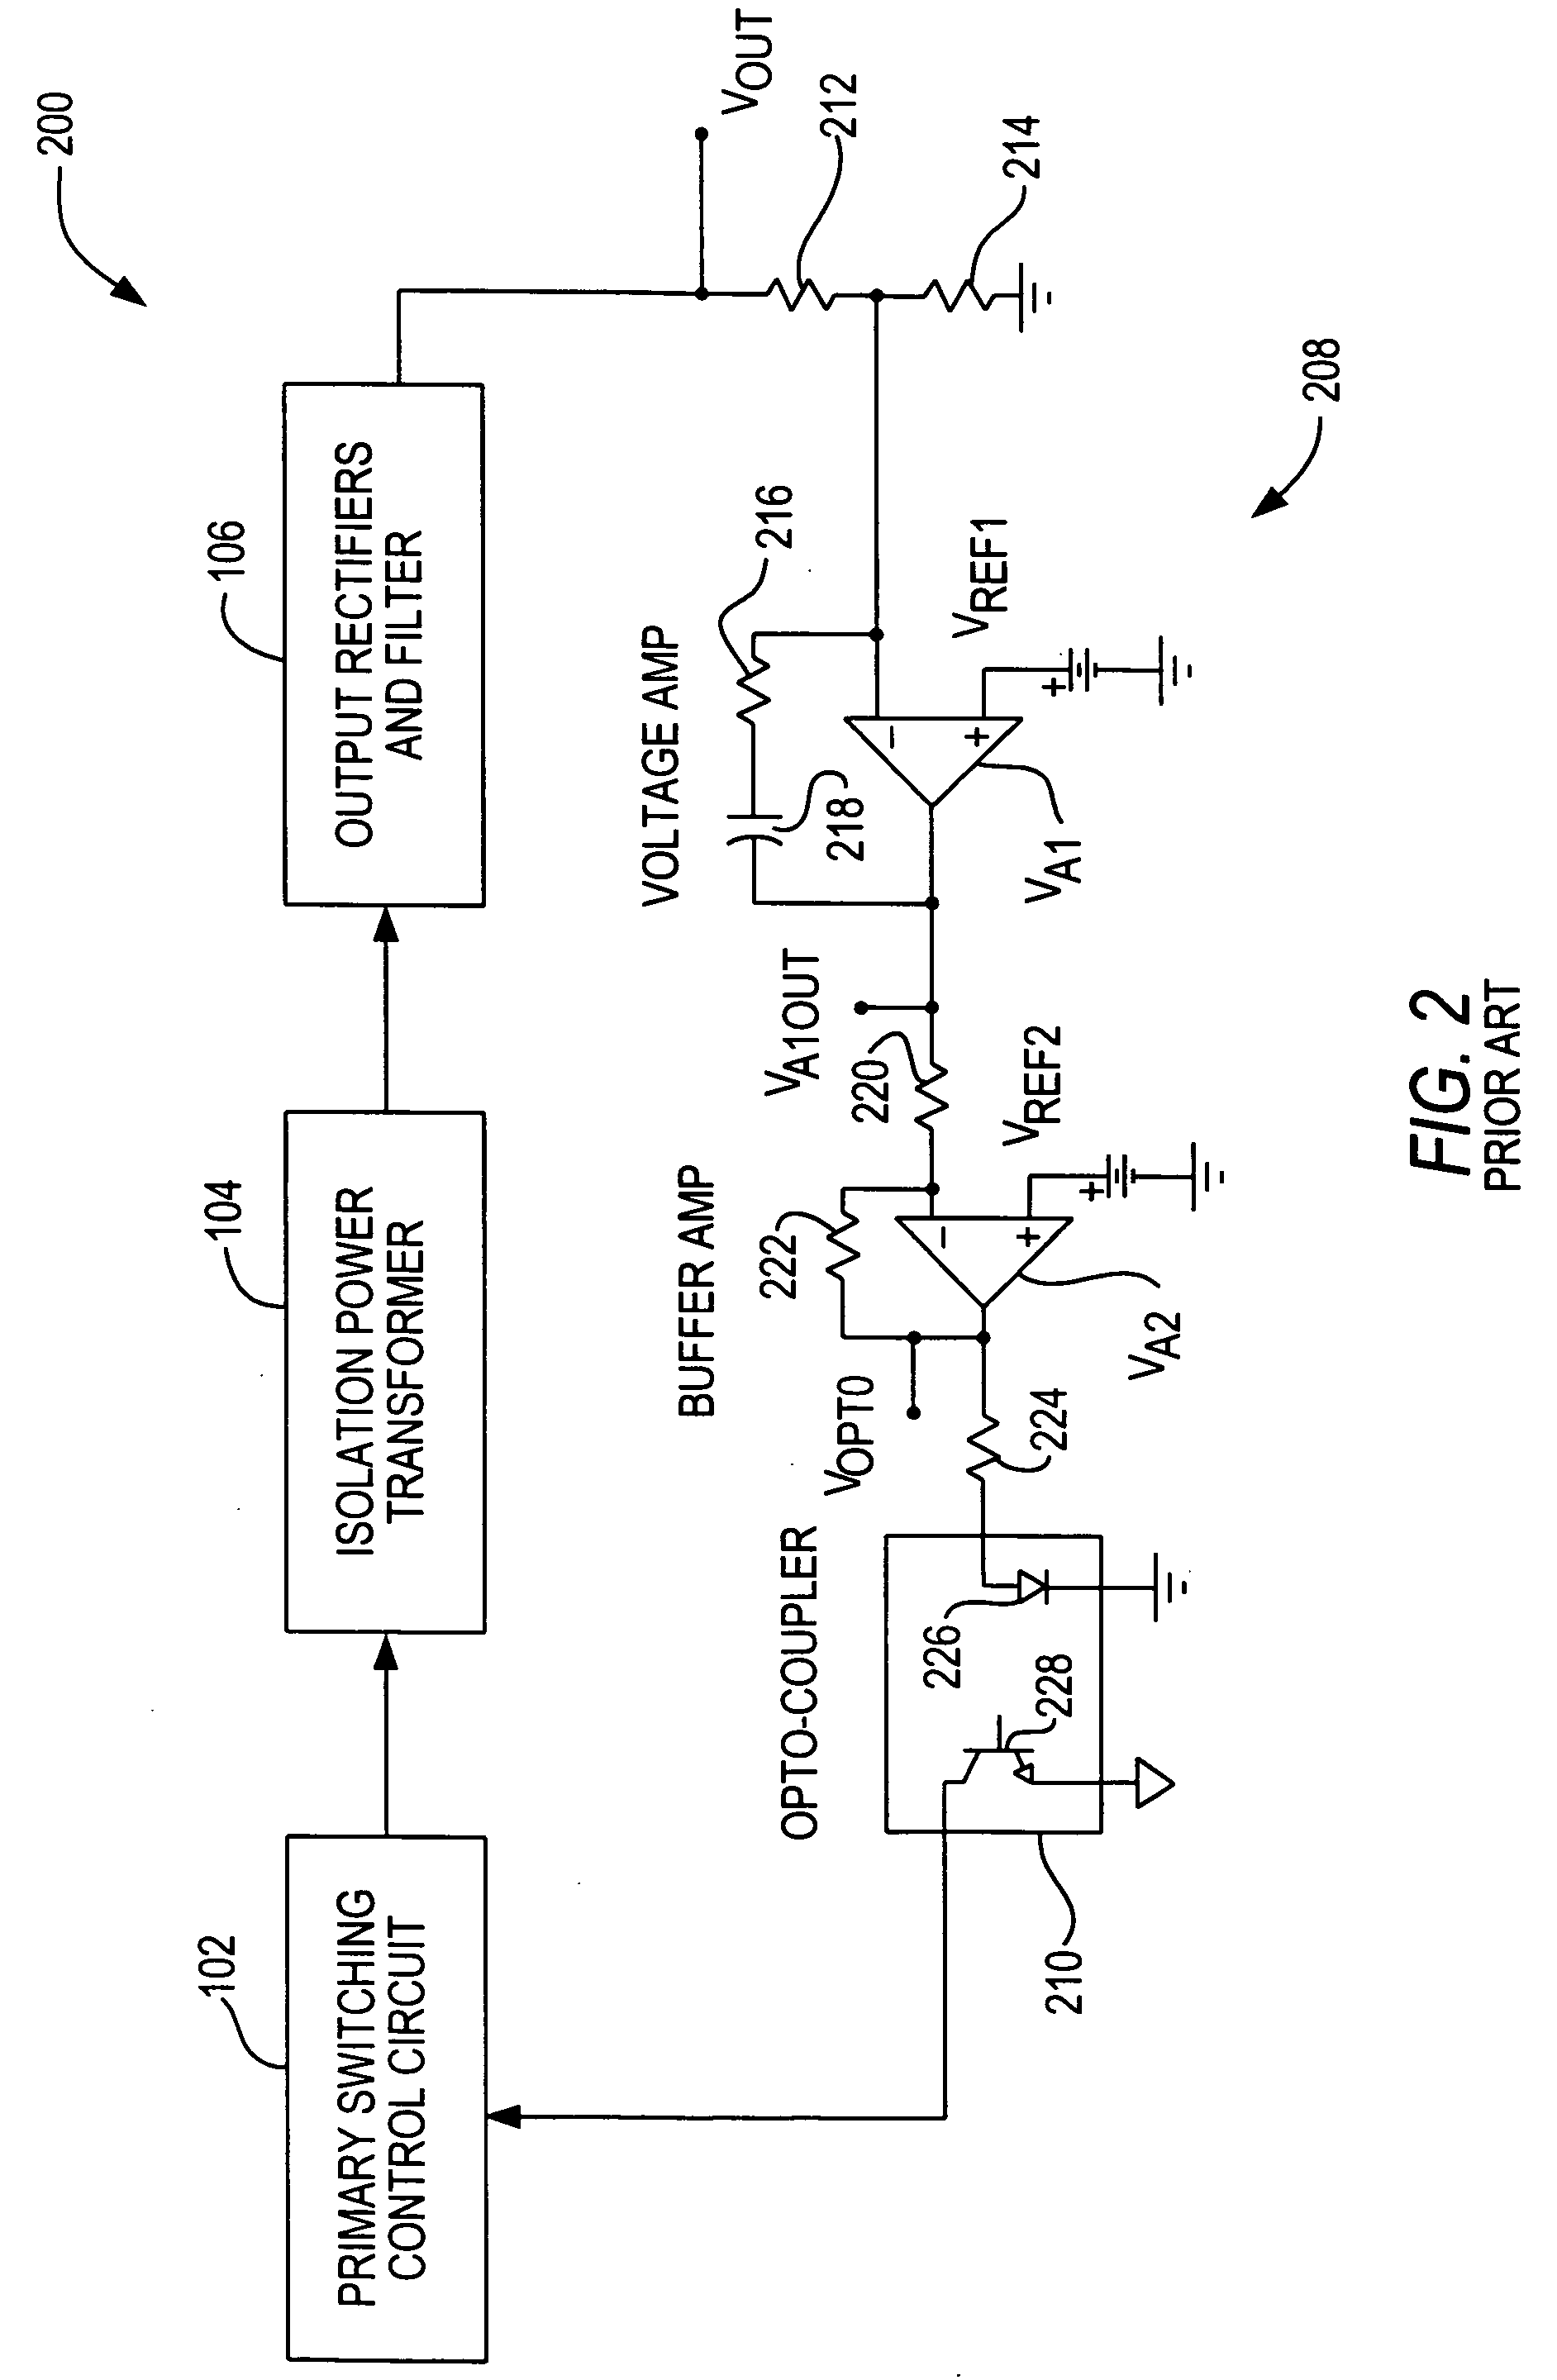 Voltage overshoot reduction circuits